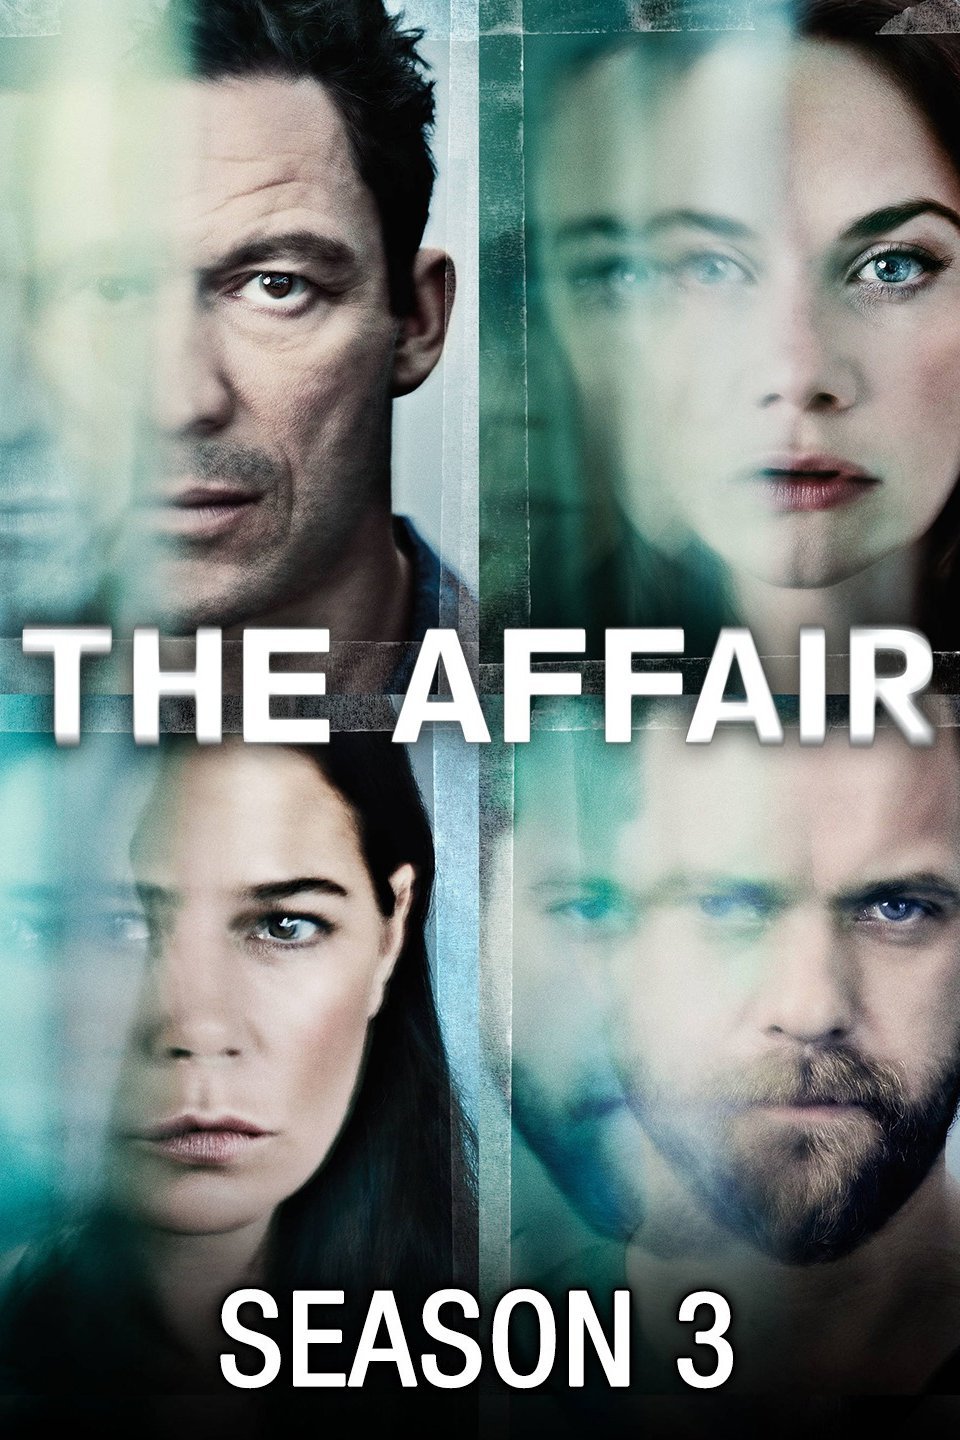 The Affair Rotten Tomatoes